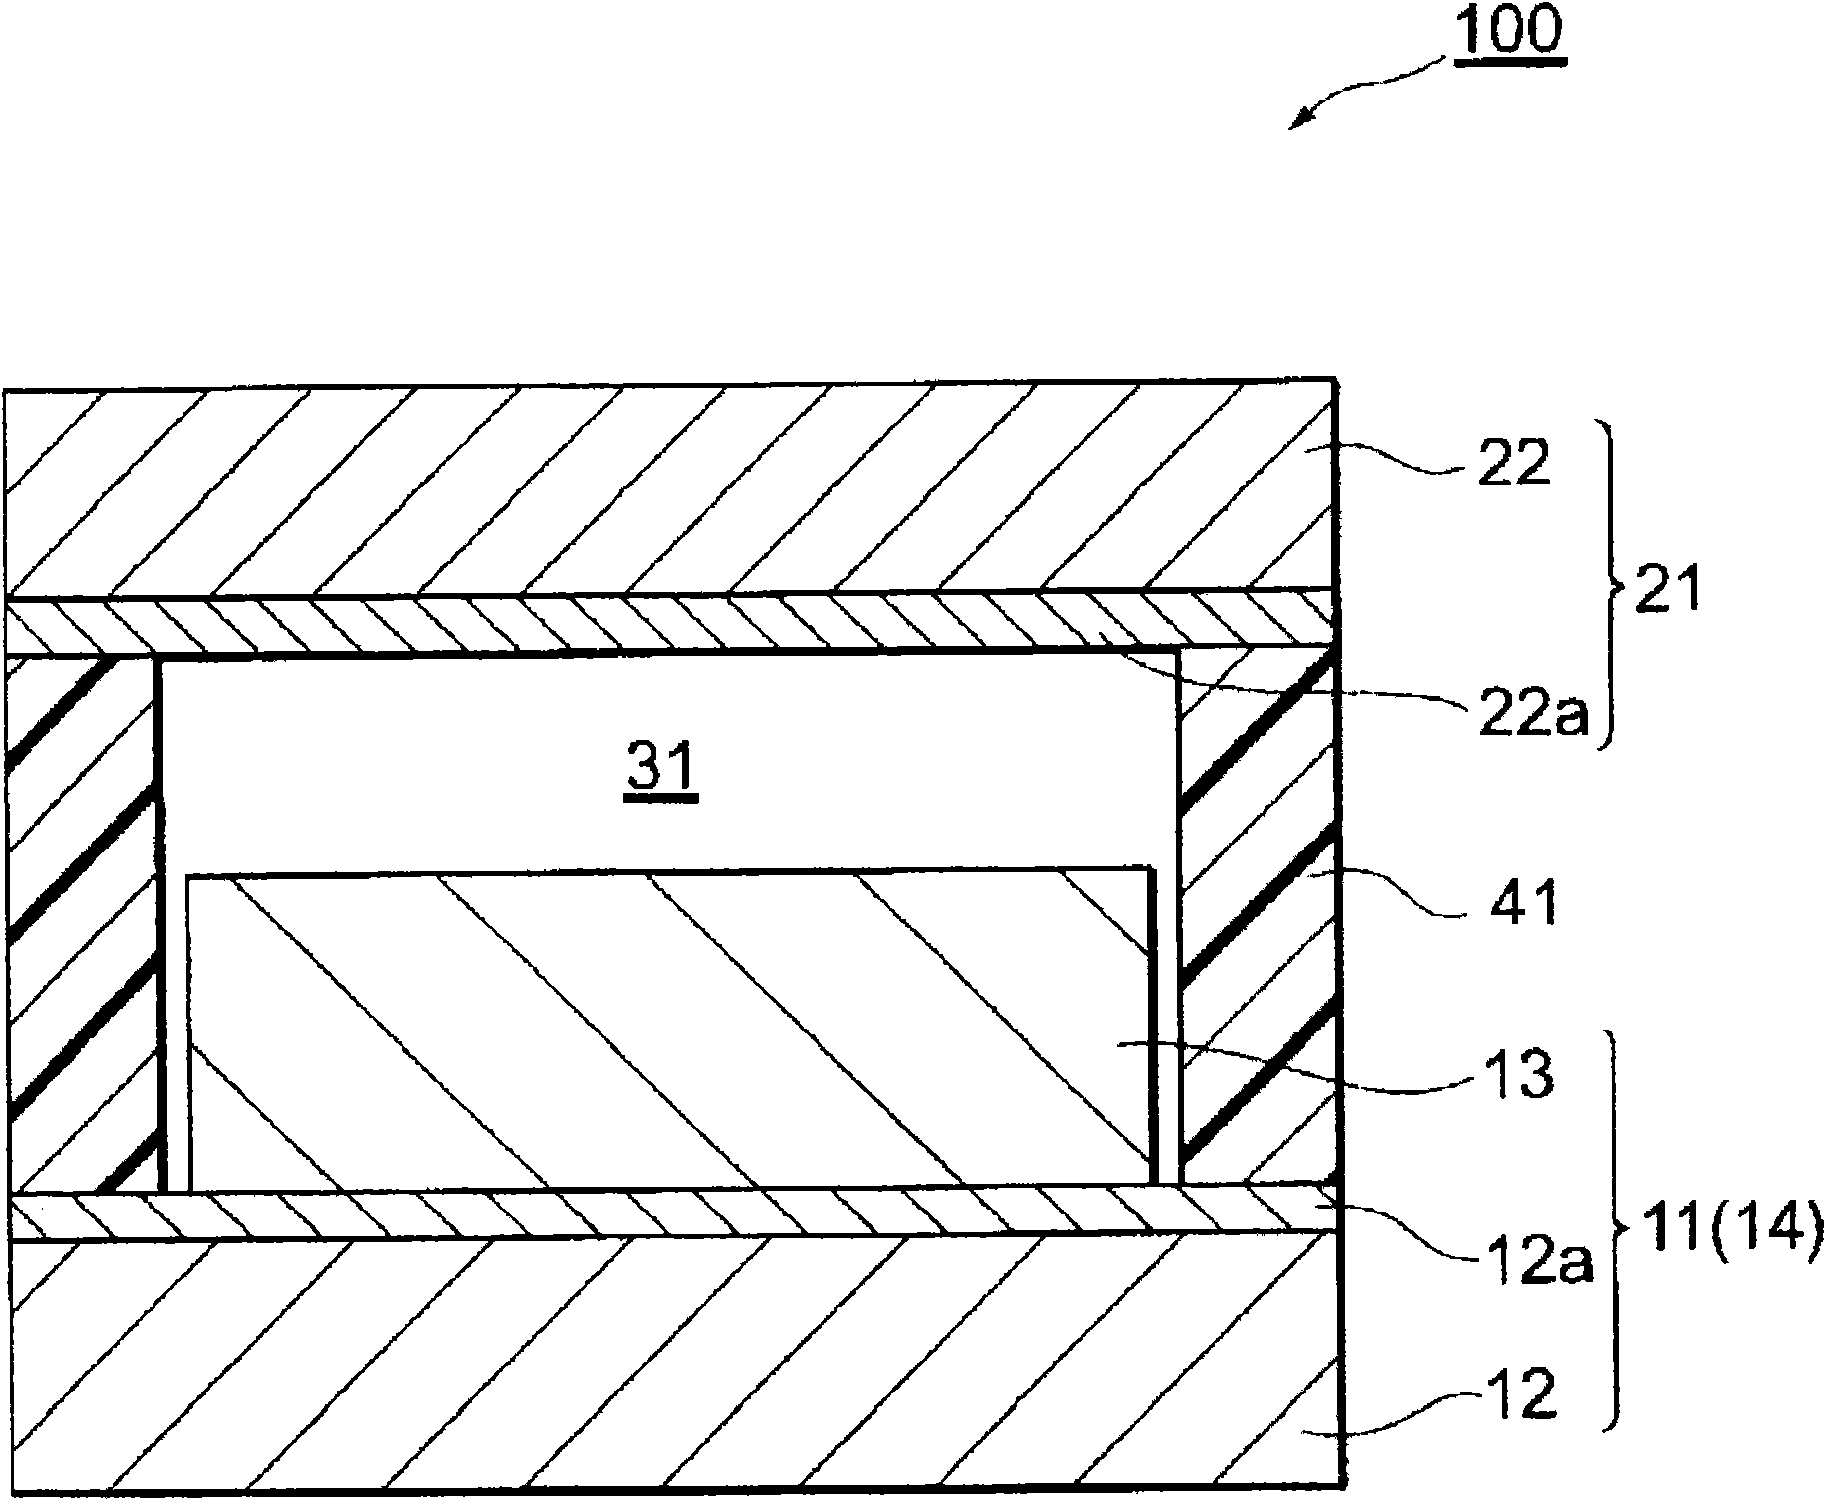 Dye-sensitized solar cell and organic solvent-free electrolyte for dye-sensitized solar cell